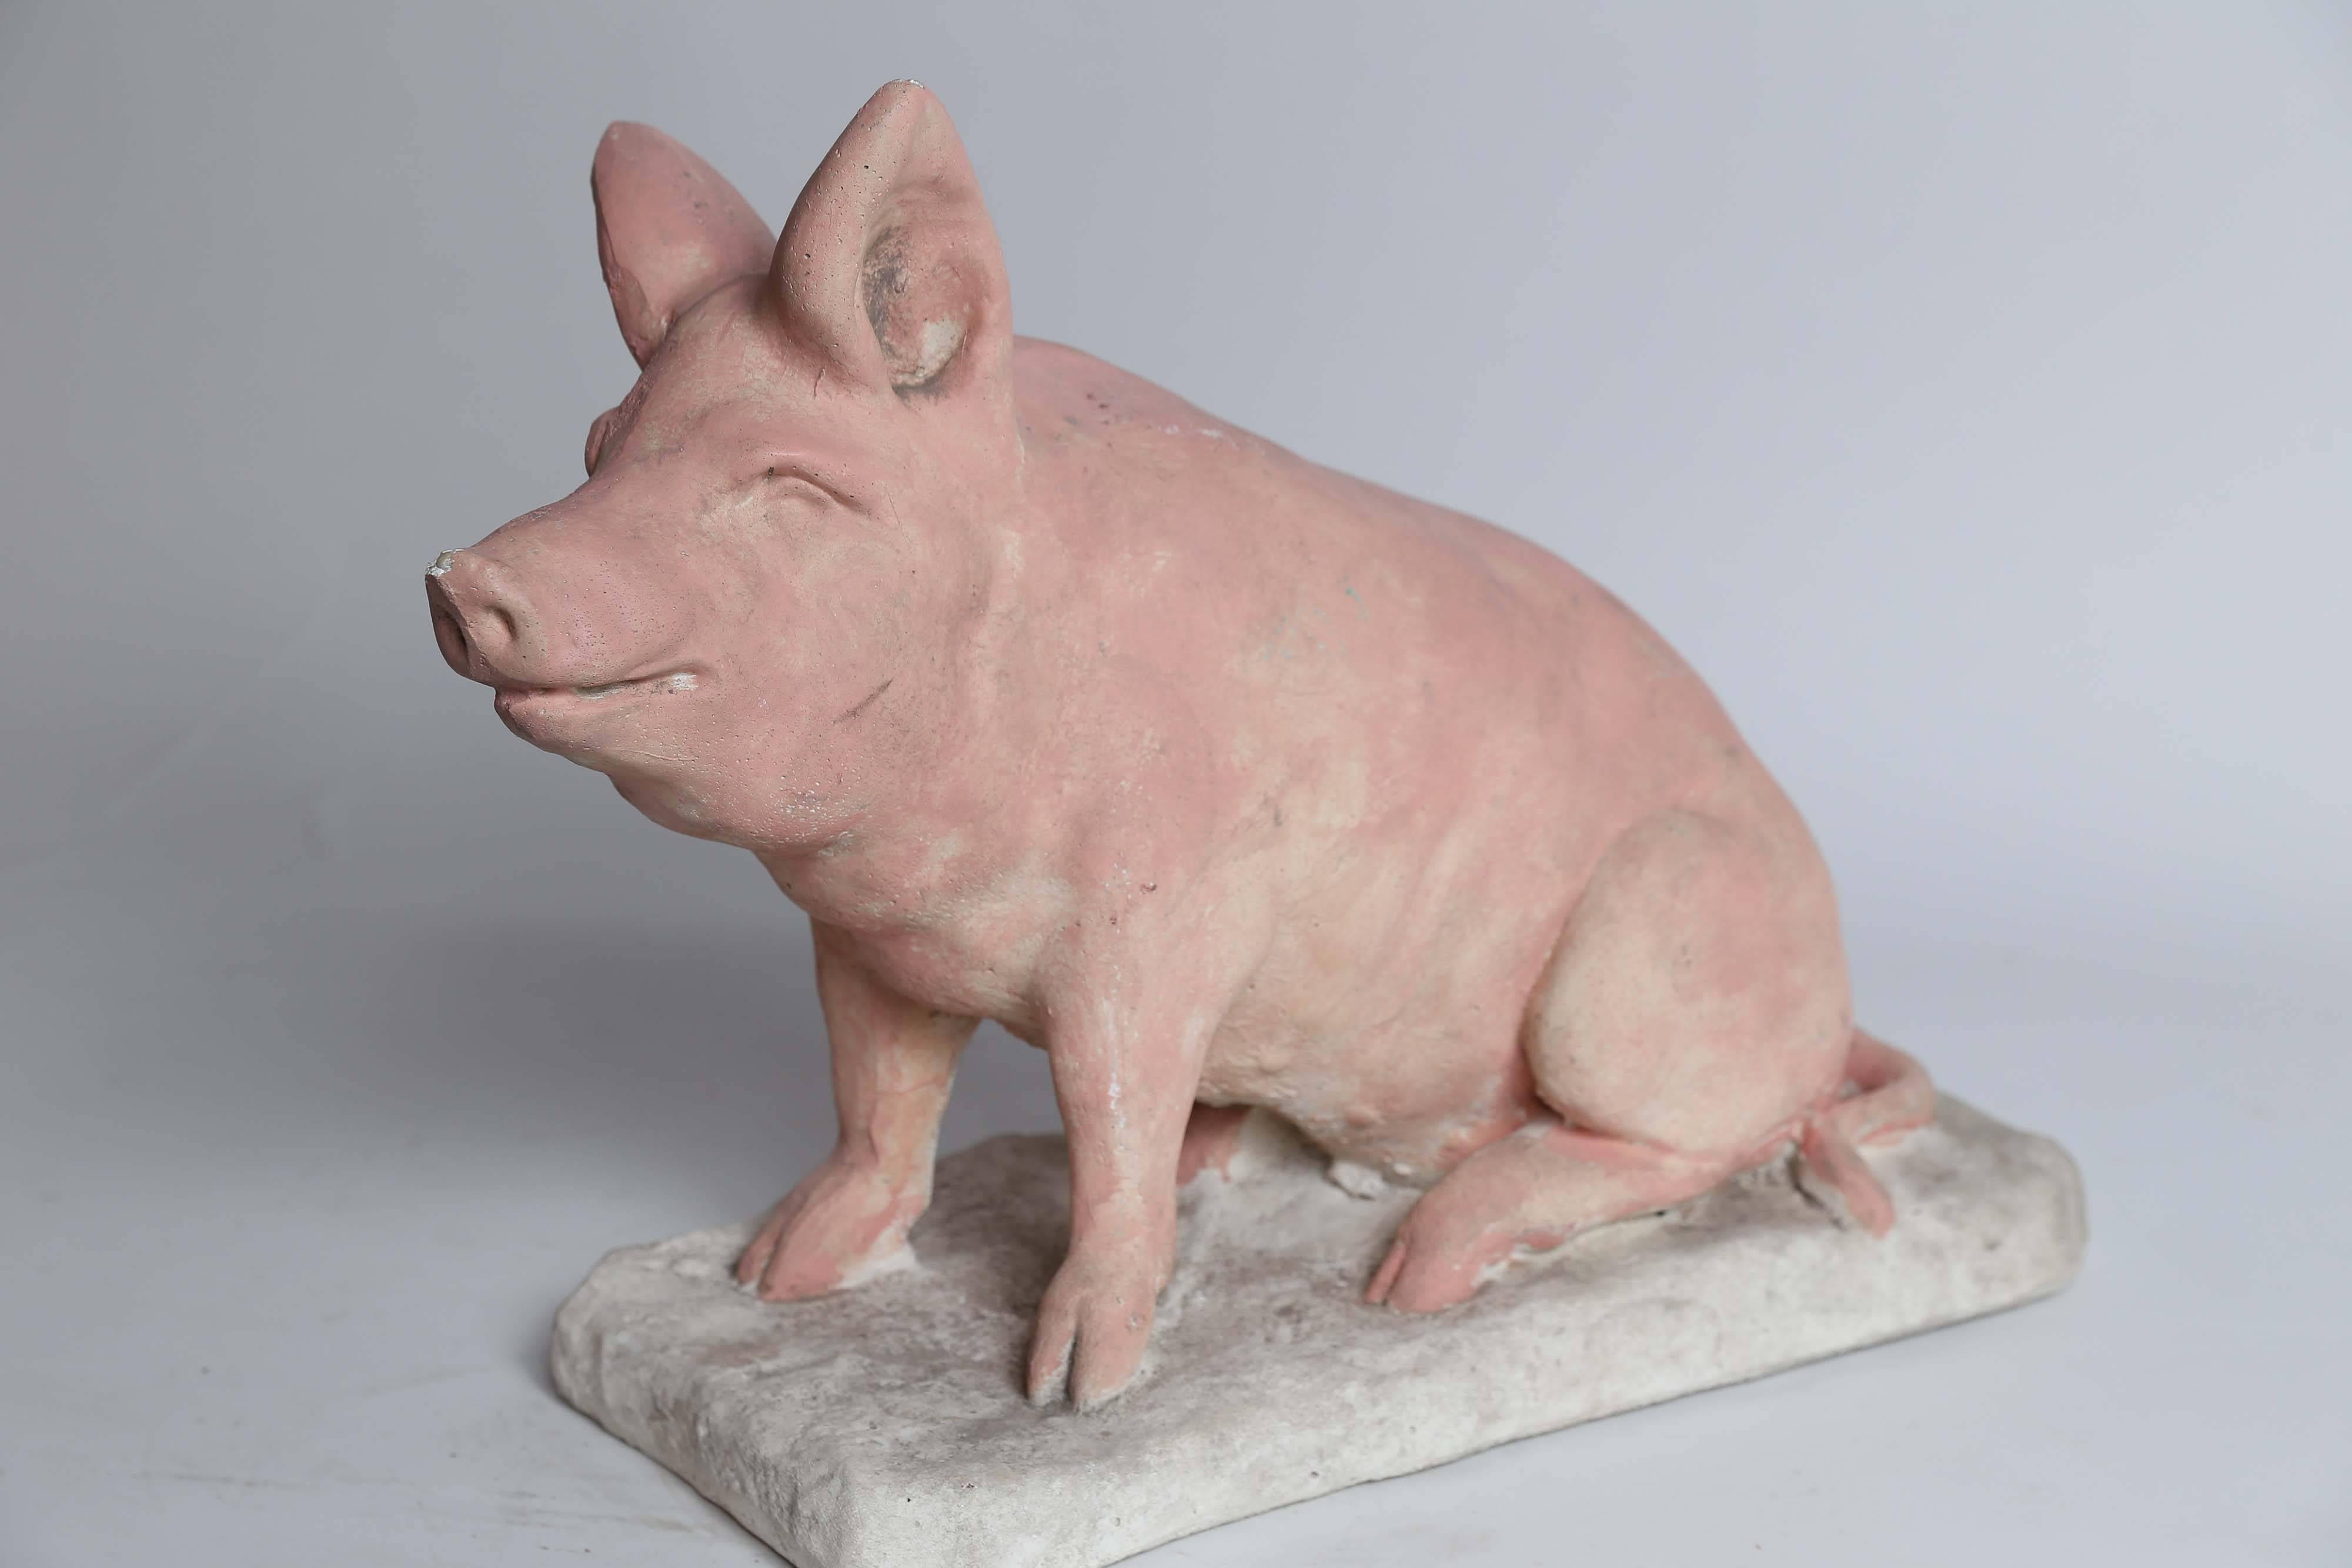 A pudgy pink pig made of concrete will take his place in your kitchen, your garden, or wherever you want a spot of whimsy. A chip on his nose and a small scrape on his ear are his only flaws.